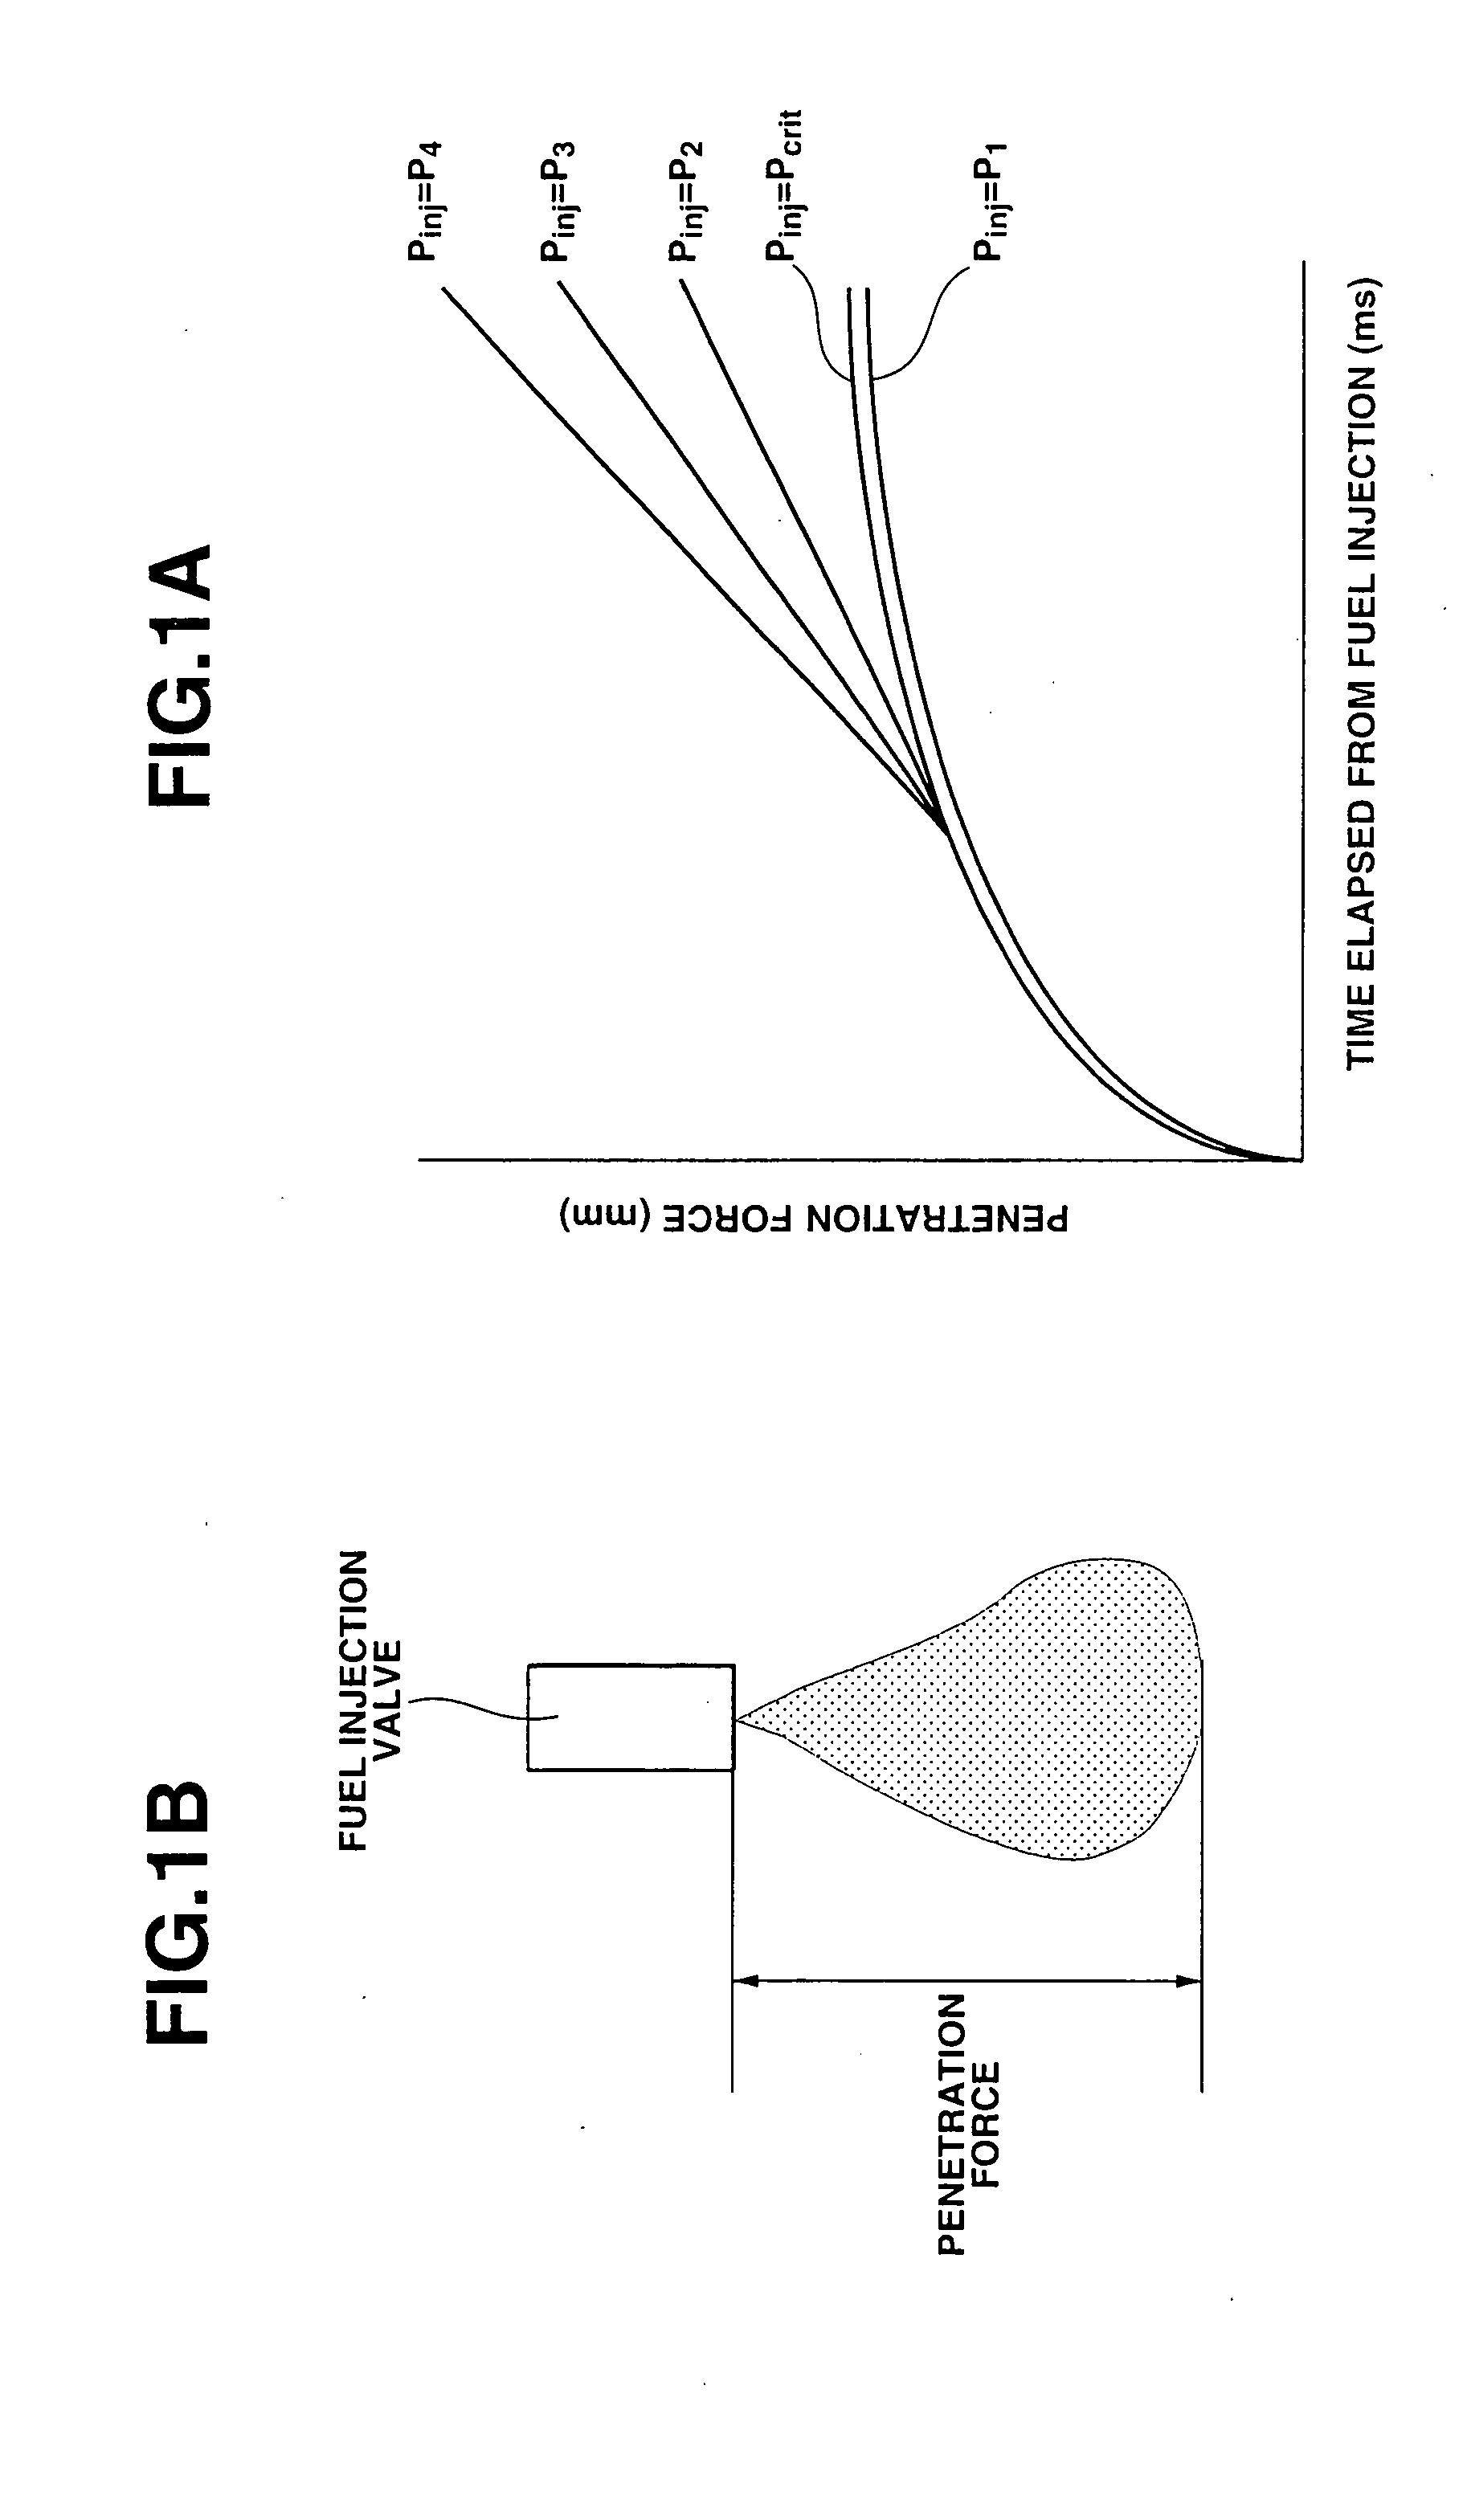 Direct fuel injection type internal combustion engine